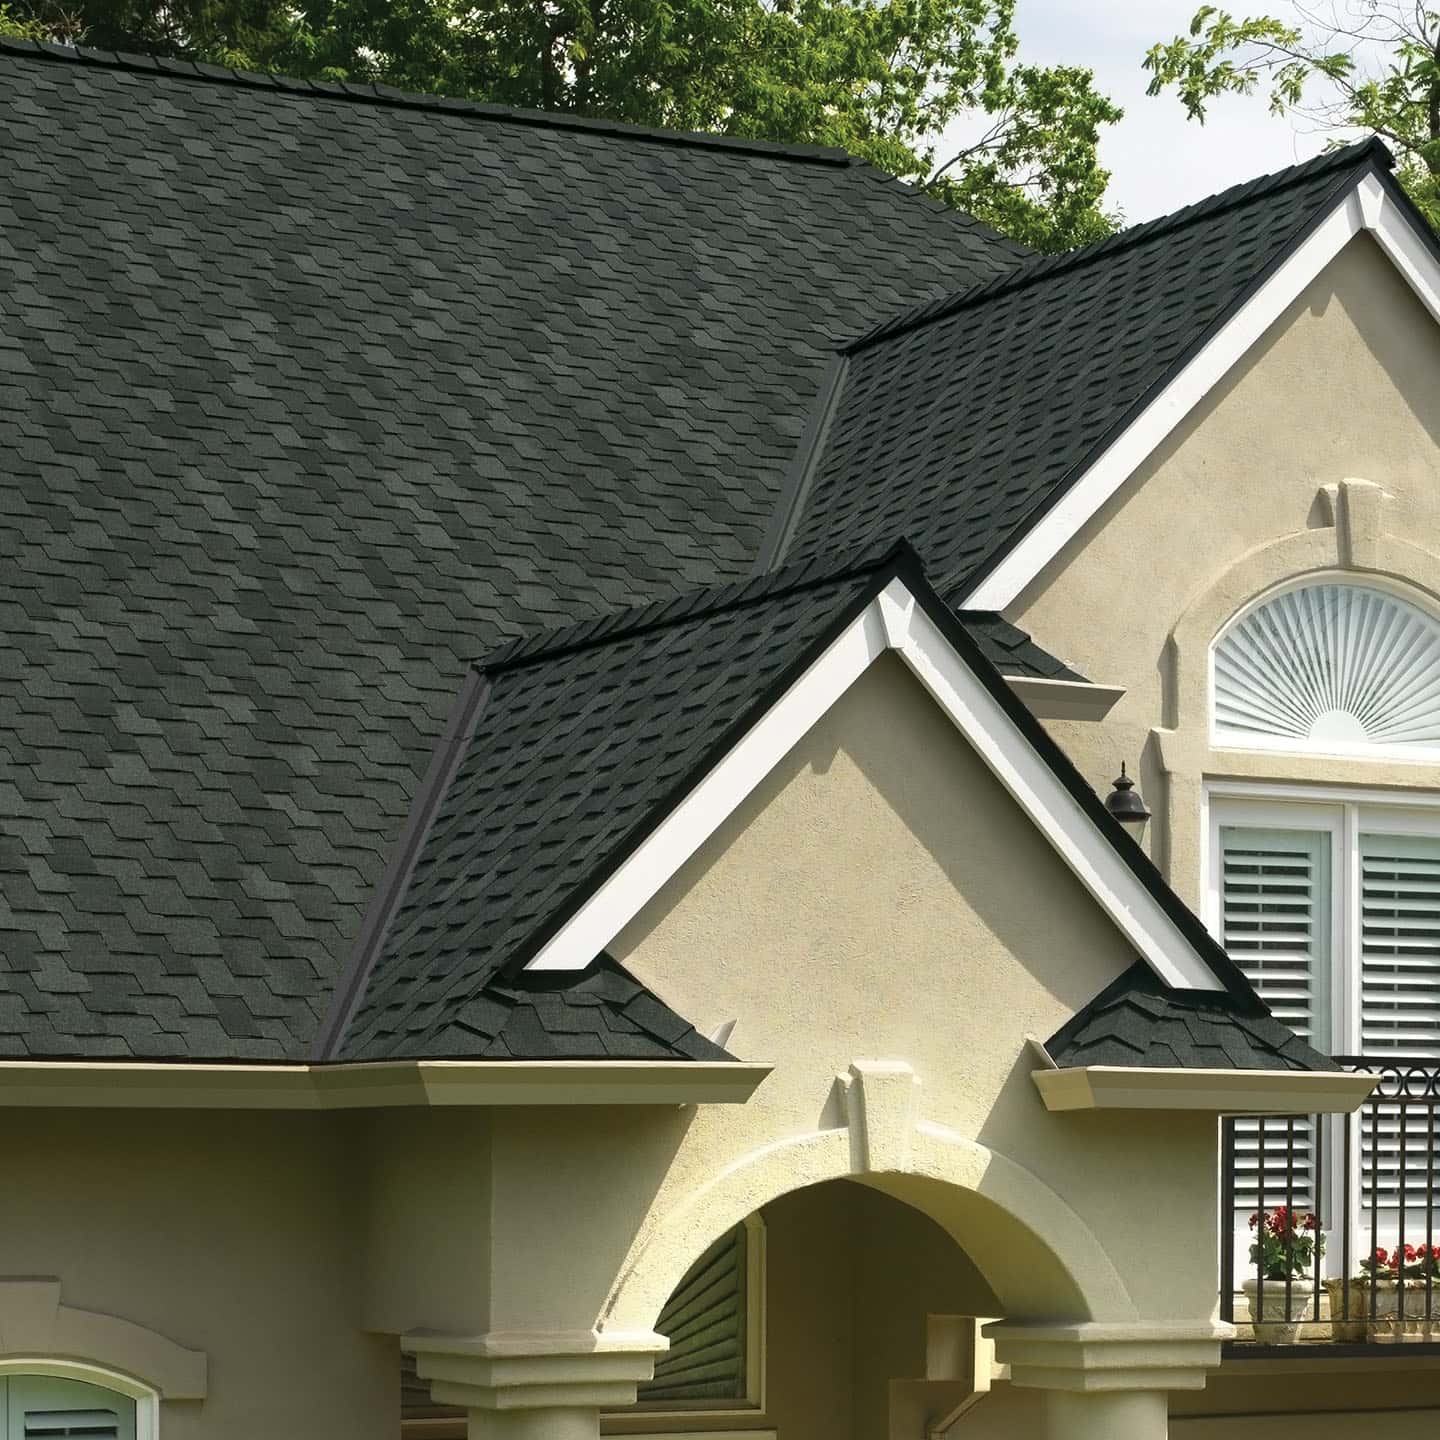 GAF Grand Sequoia shingle in Charcoal is rated Class 4 hail resistant